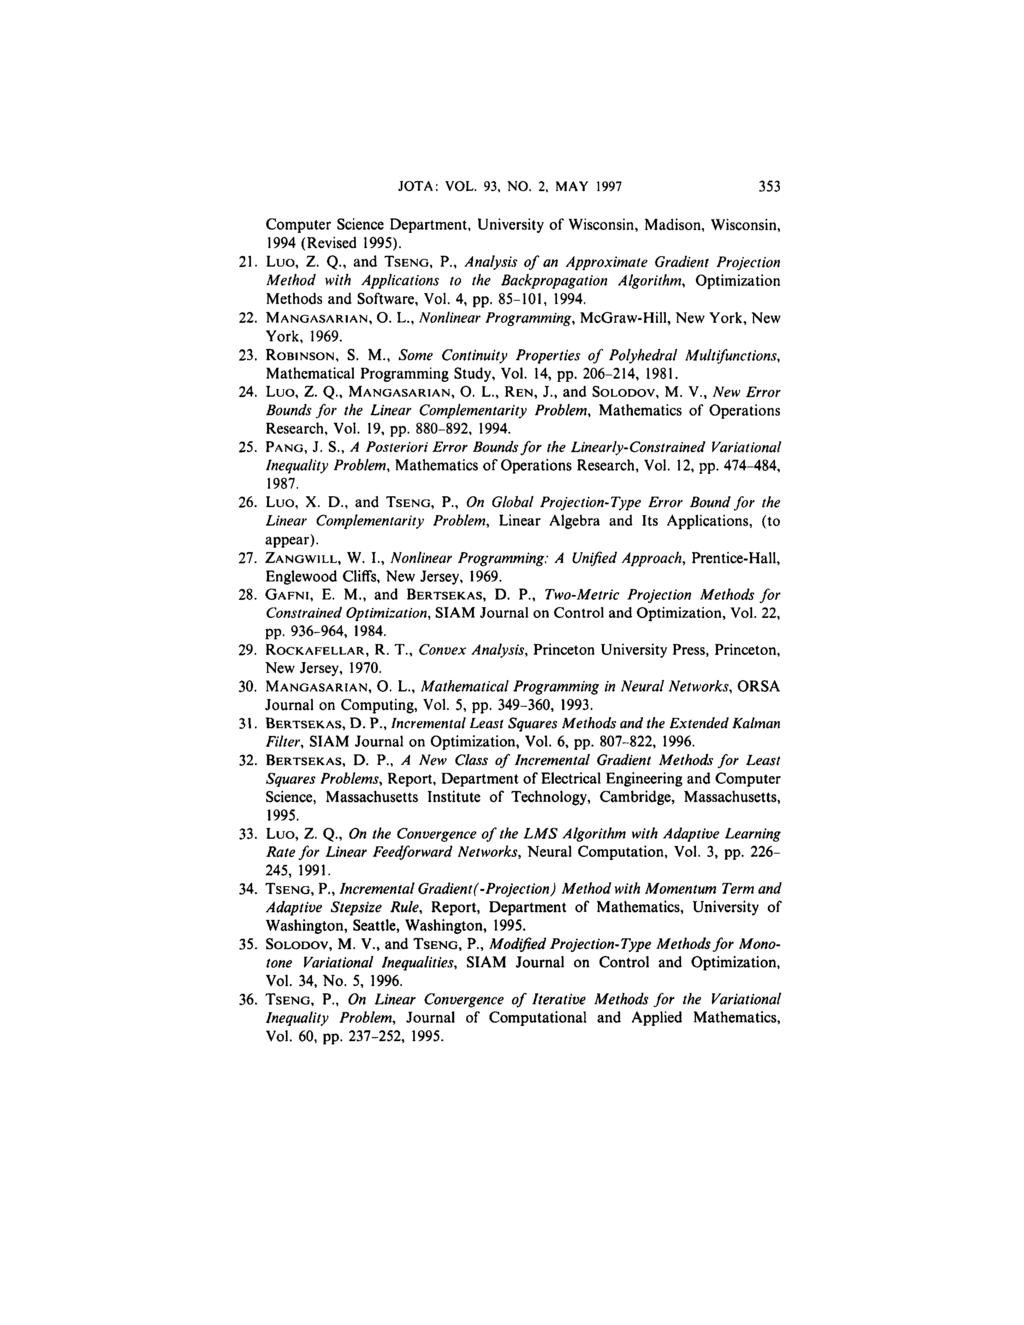 JOTA: VOL. 93, NO. 2, MAY 1997 353 Computer Science Department, University of Wisconsin, Madison, Wisconsin, 1994 (Revised 1995). 21. Luo, Z. Q., and TSENG, P.